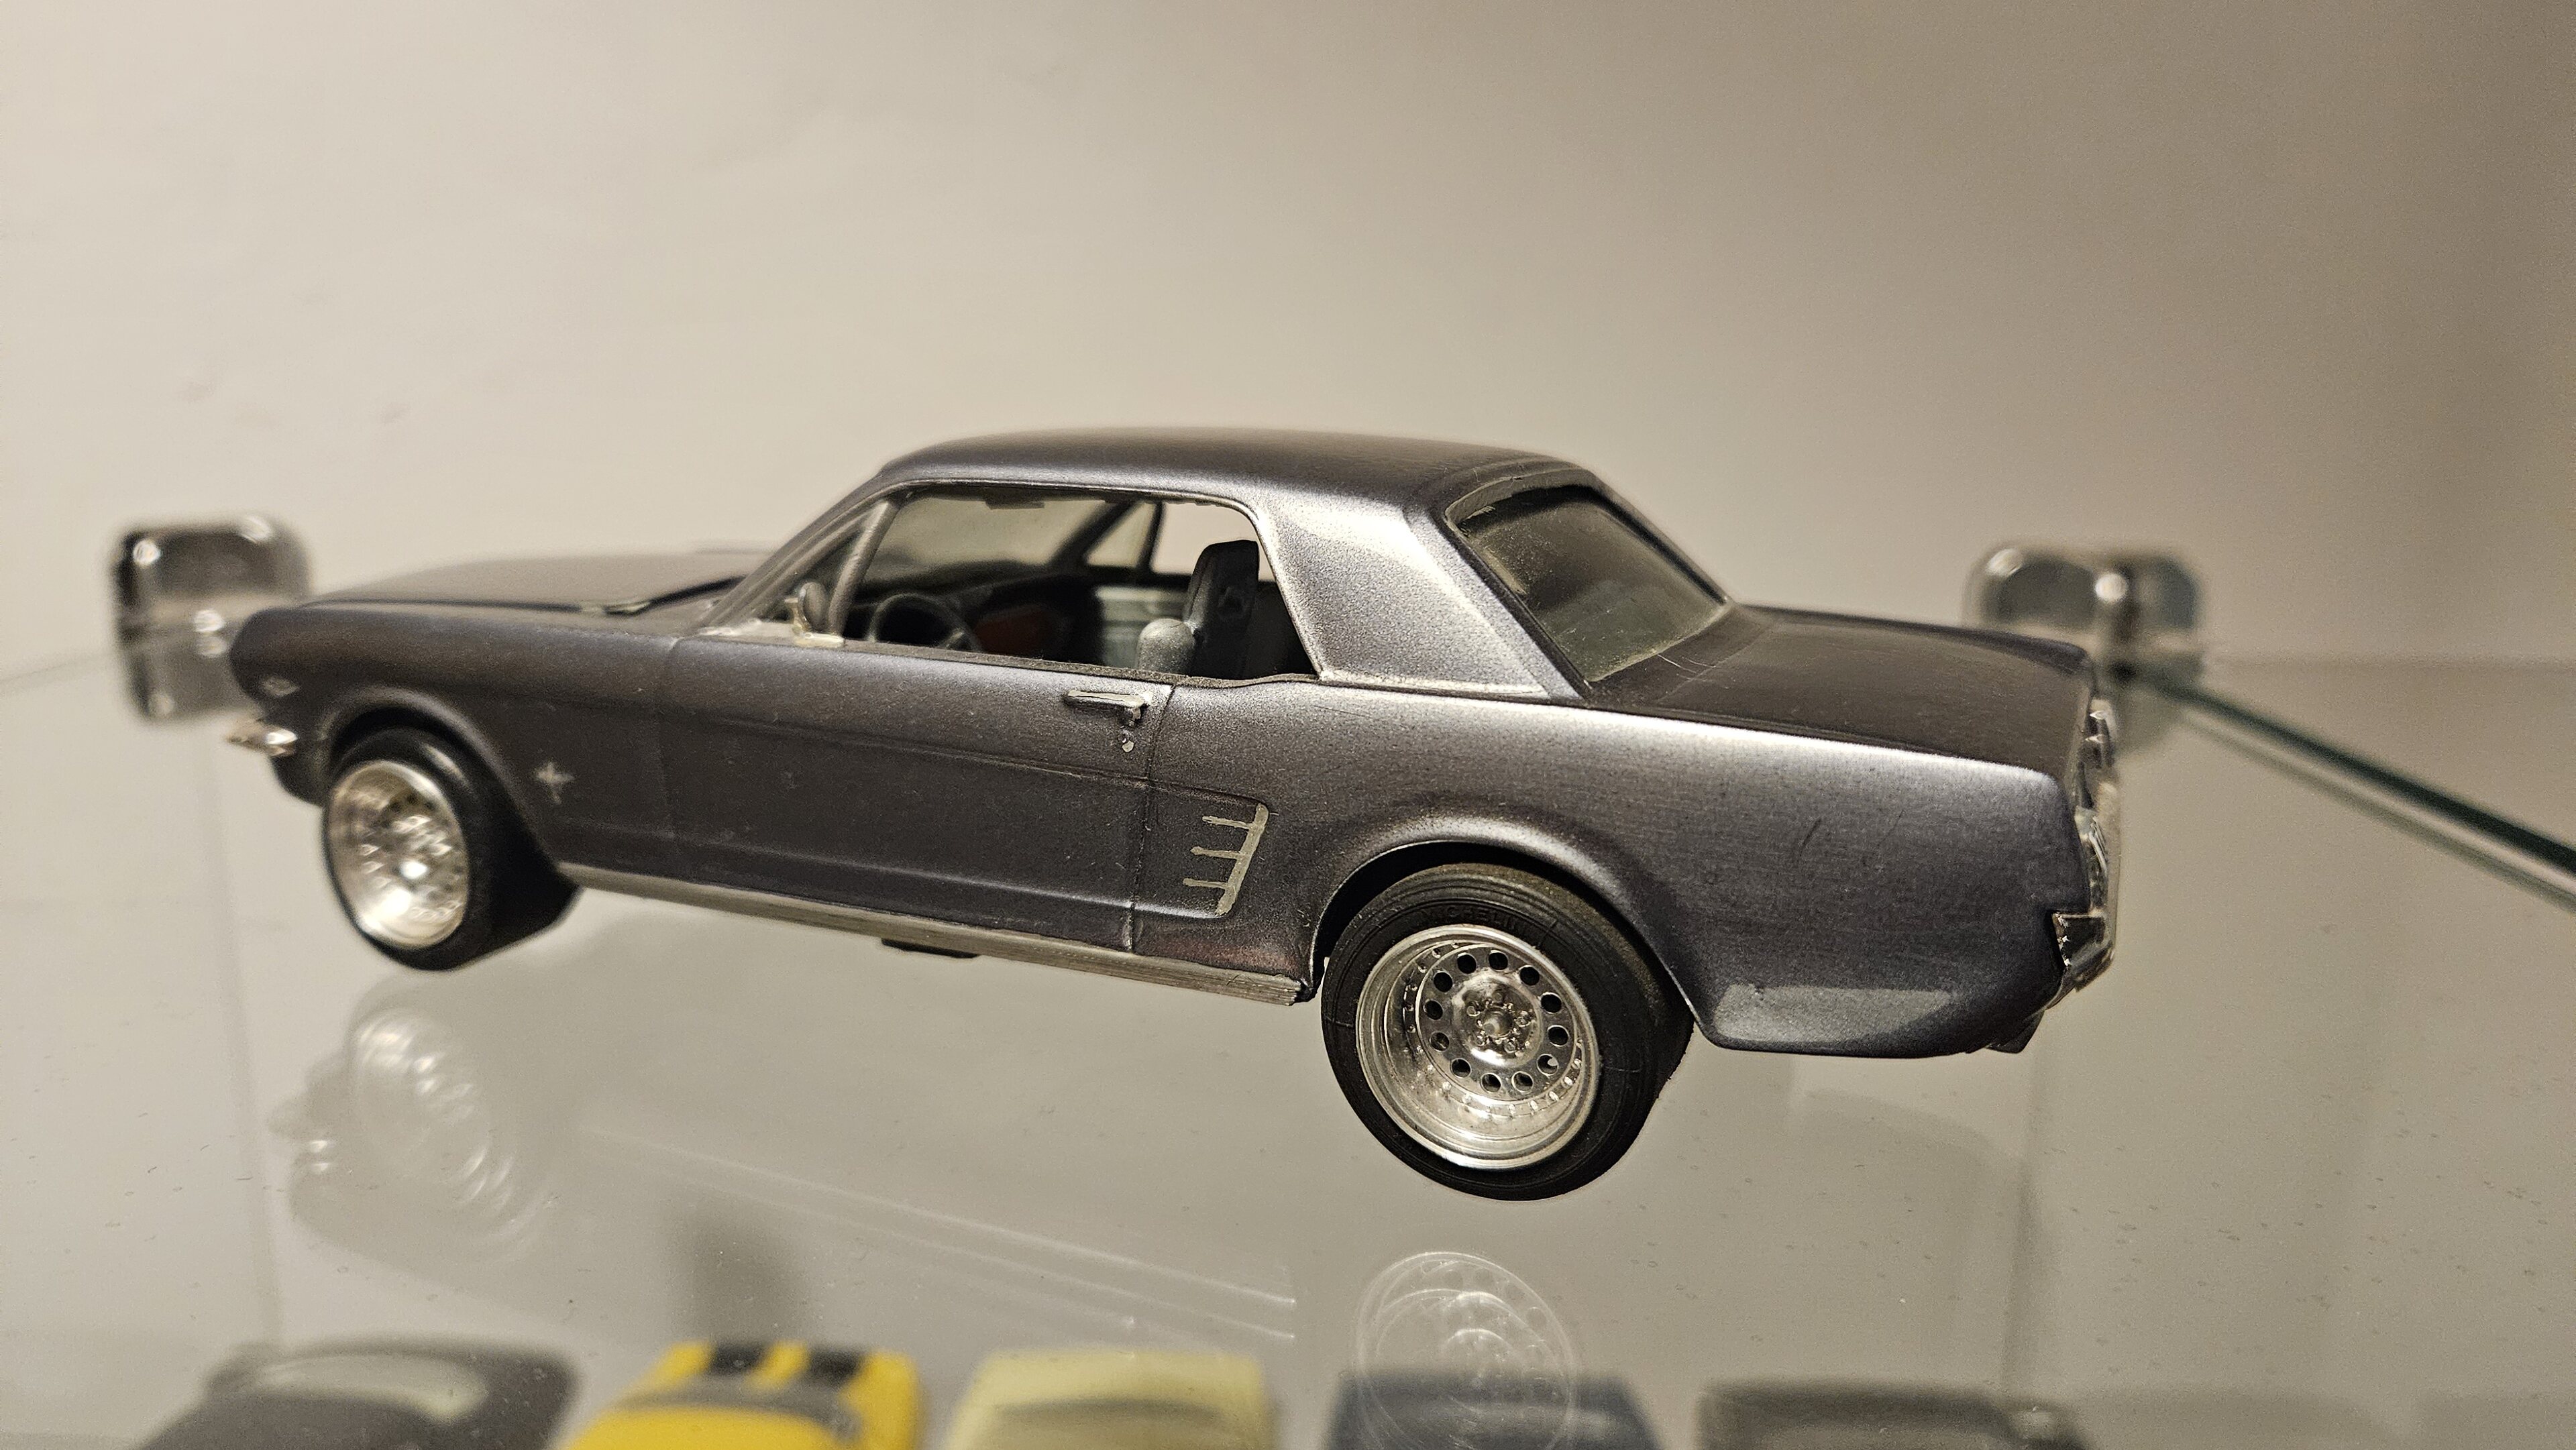 AMT 1:25 1966 Ford Mustang Hardtop - Page 1 - Scale Models - PistonHeads UK - The image shows a detailed model of an old-fashioned, muscle car displayed on a transparent stand. It is situated in a clear case, allowing viewers to appreciate its features from all angles. The car has a shiny silver finish, with the bodywork gleaming. The tires are black and appear to be made of rubber. This miniature automobile is positioned centrally within the image, drawing attention to it as the main subject.